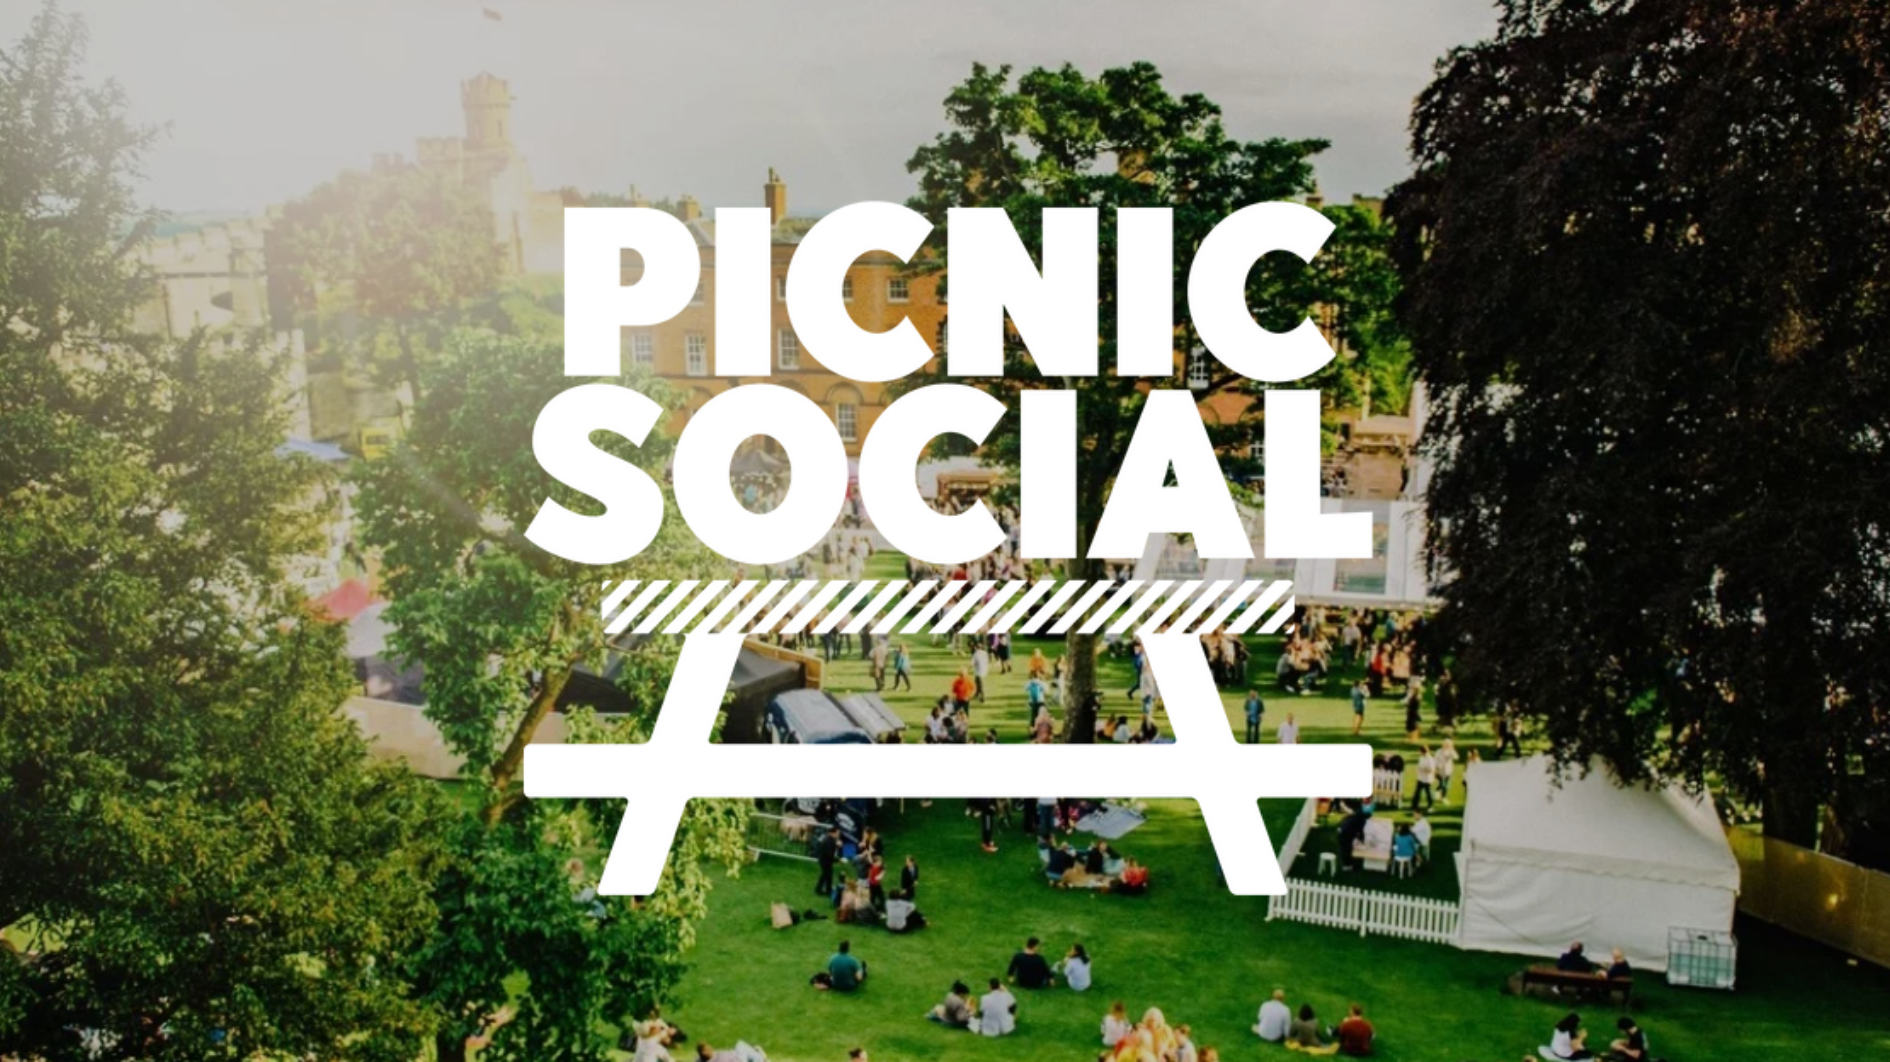 The Picnic Social logo shows a bench with the castle behind